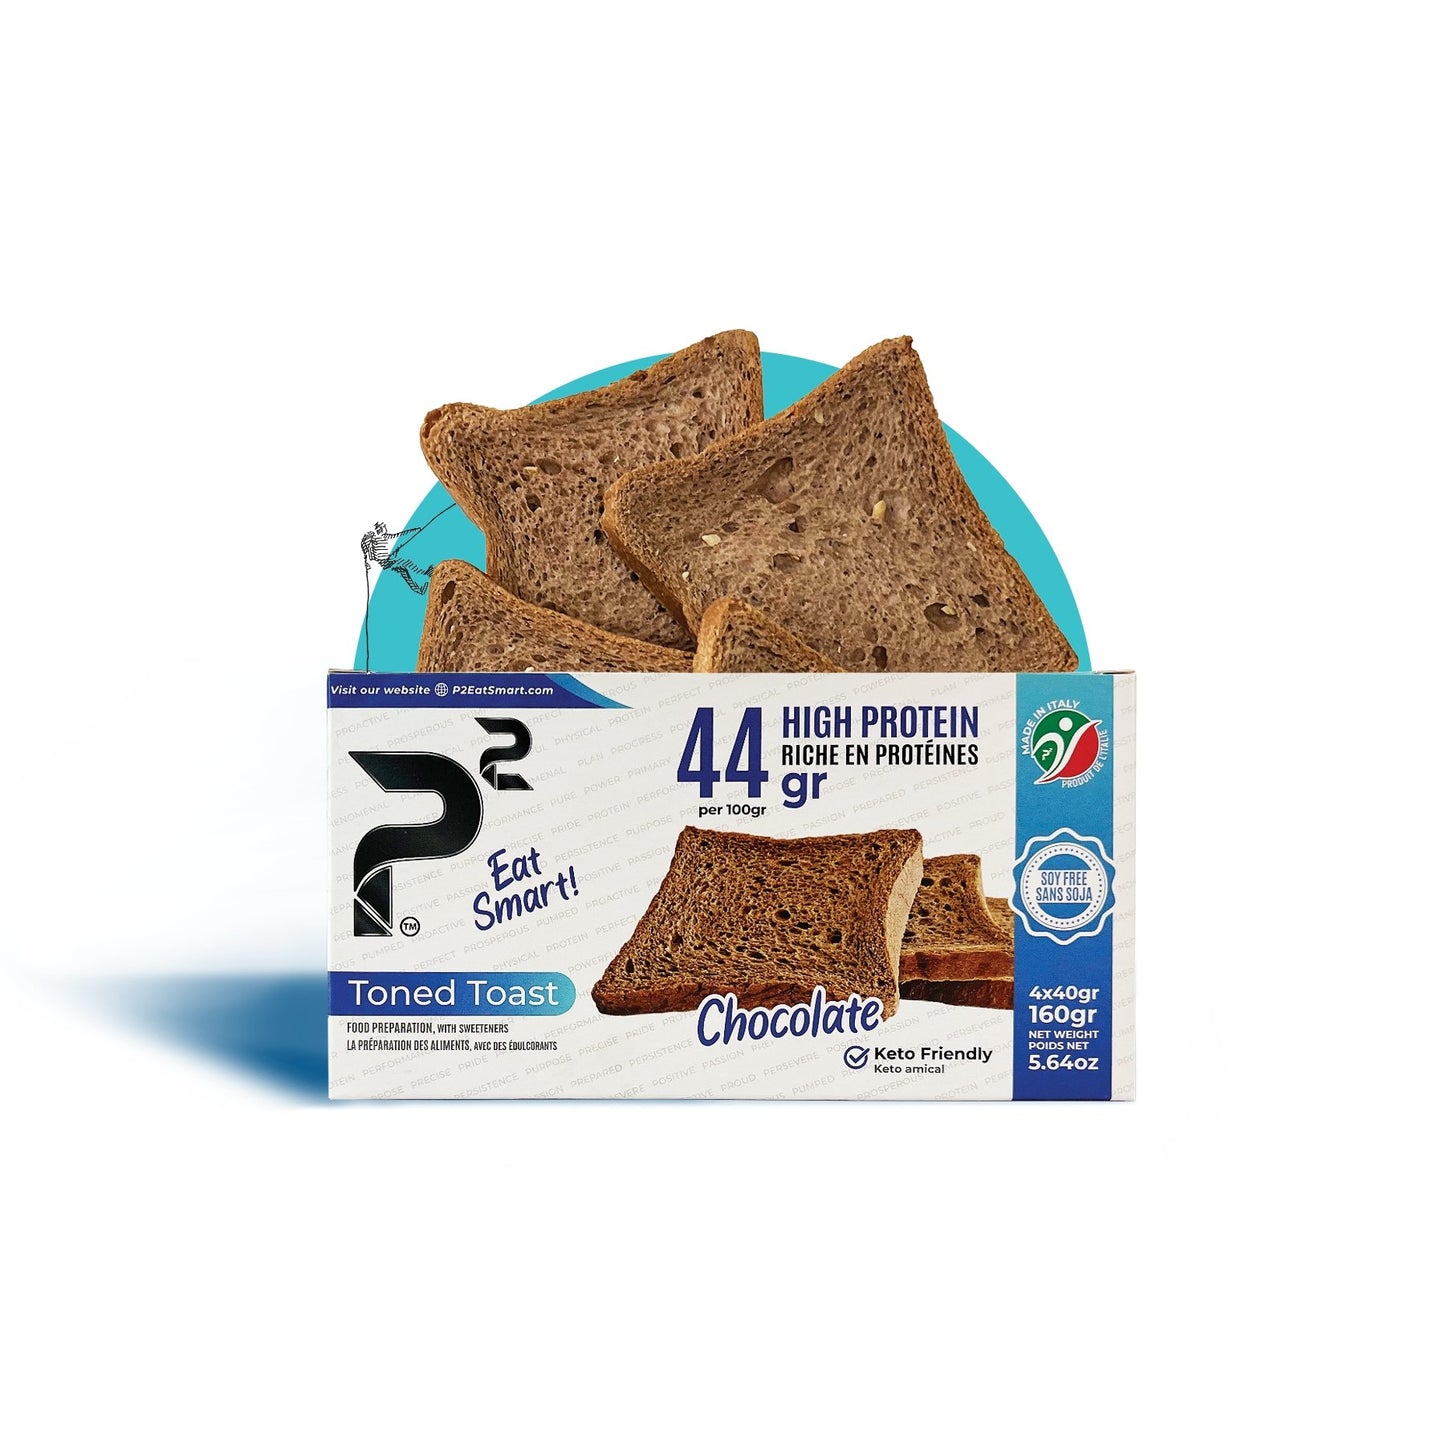 Toned Toast Chocolate. High protein. Low carbs. 44g protein and 8g net carbs per 100g. No added sugar, Soy free, No flour, Lactose free, Diabetic friendly, Low glycemic index.